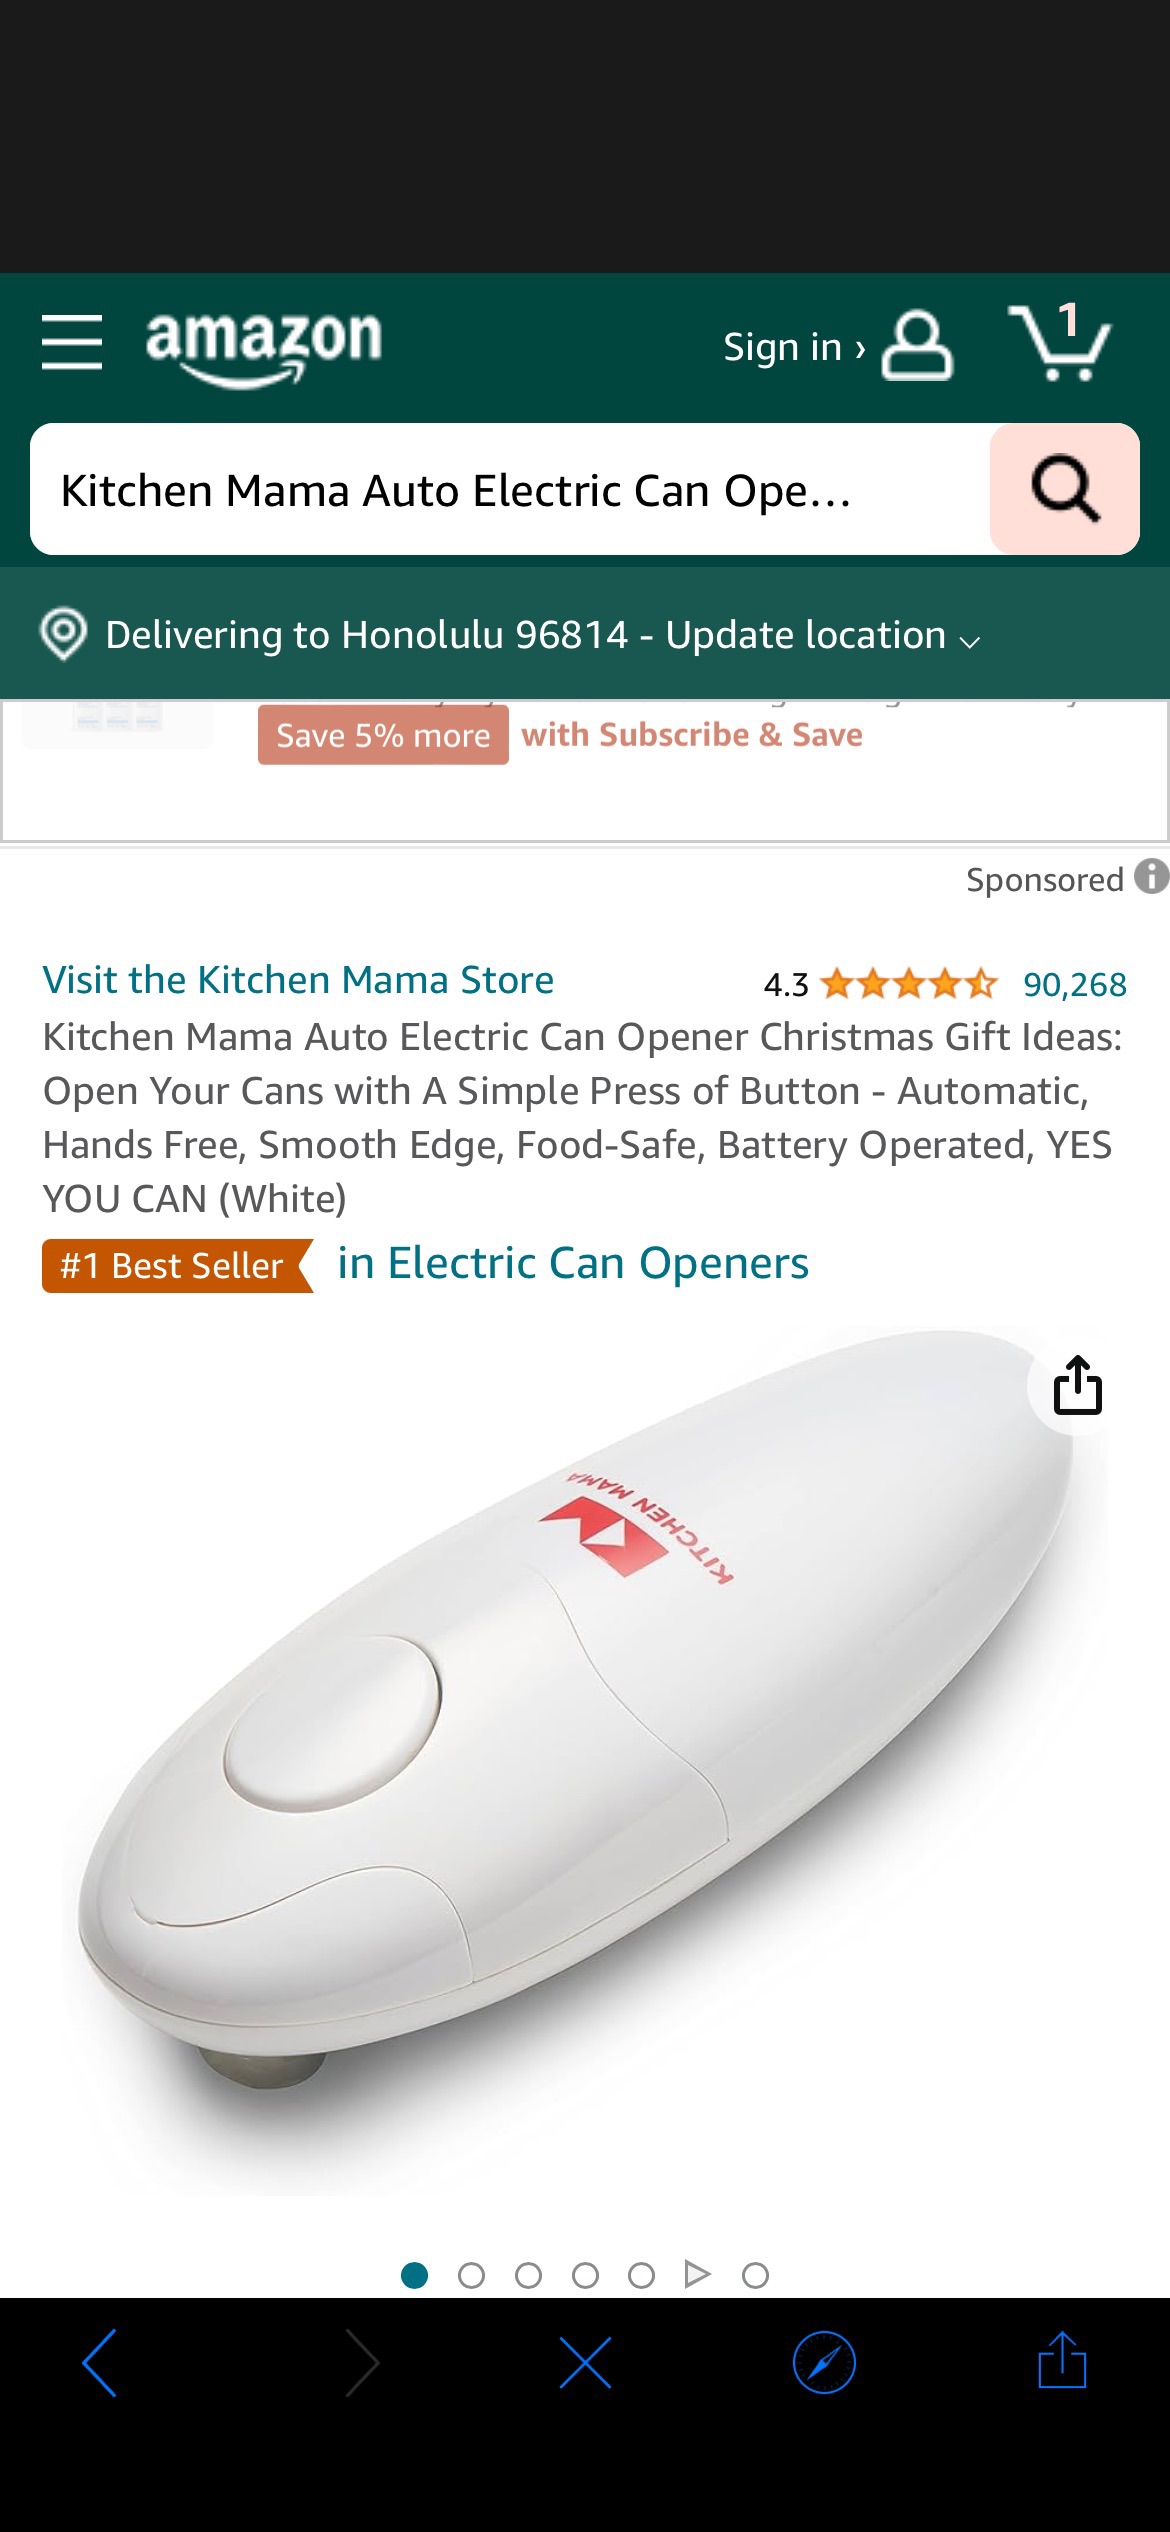 Amazon.com: Kitchen Mama Auto Electric Can Opener Christmas Gift Ideas: Open Your Cans with A Simple Press of Button - Automatic, Hands Free, Smooth Edge, Food-Safe, Battery Operated, YES YOU CAN (Whi